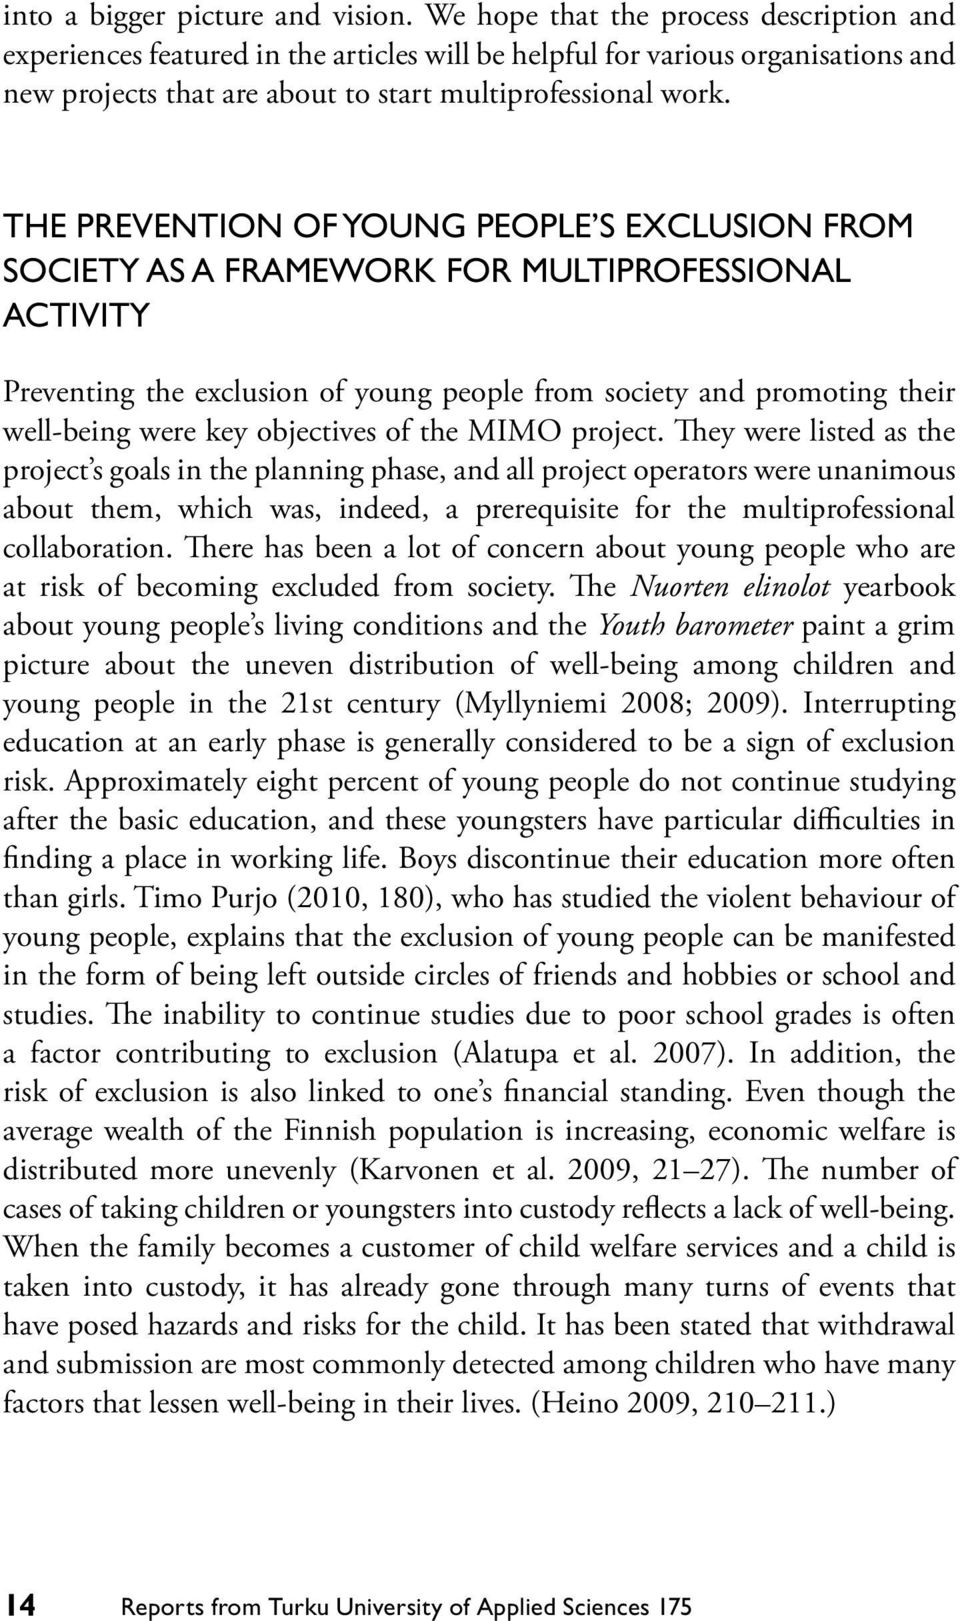 The prevention of young people s exclusion from society as a framework for multiprofessional activity Preventing the exclusion of young people from society and promoting their well-being were key